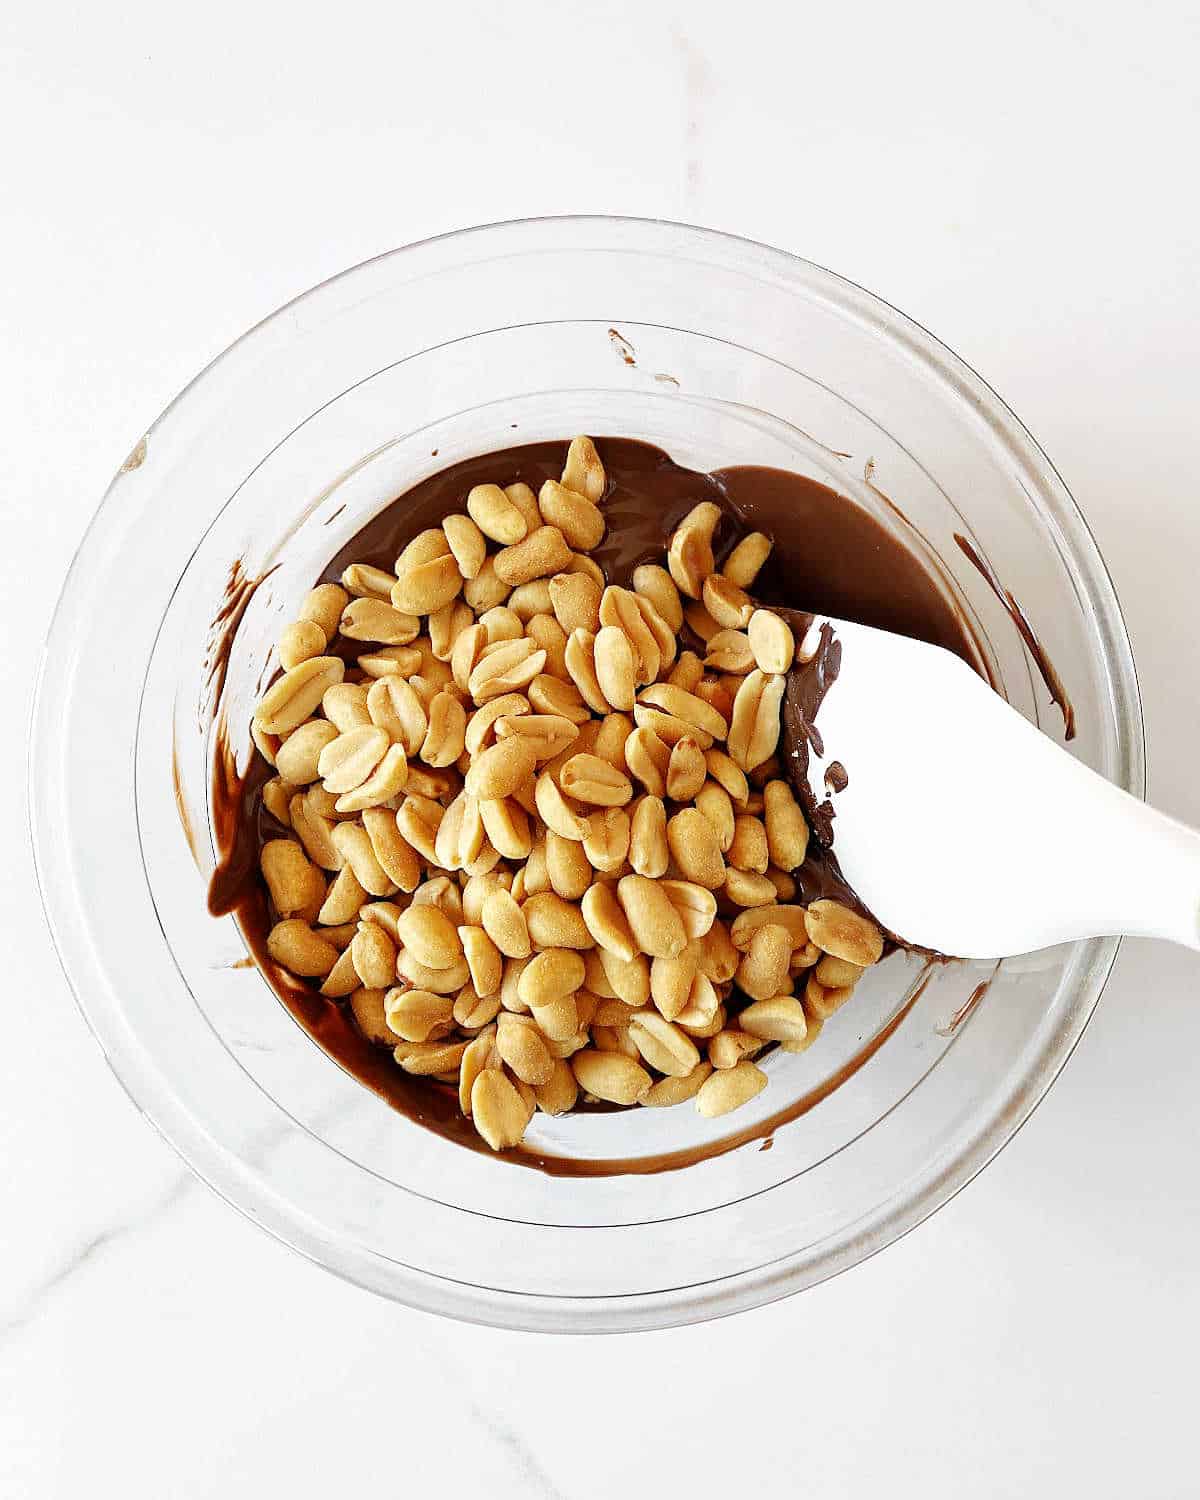 Peanuts added to melted chocolate in a glass bowl with a white spatula. White marble suface.